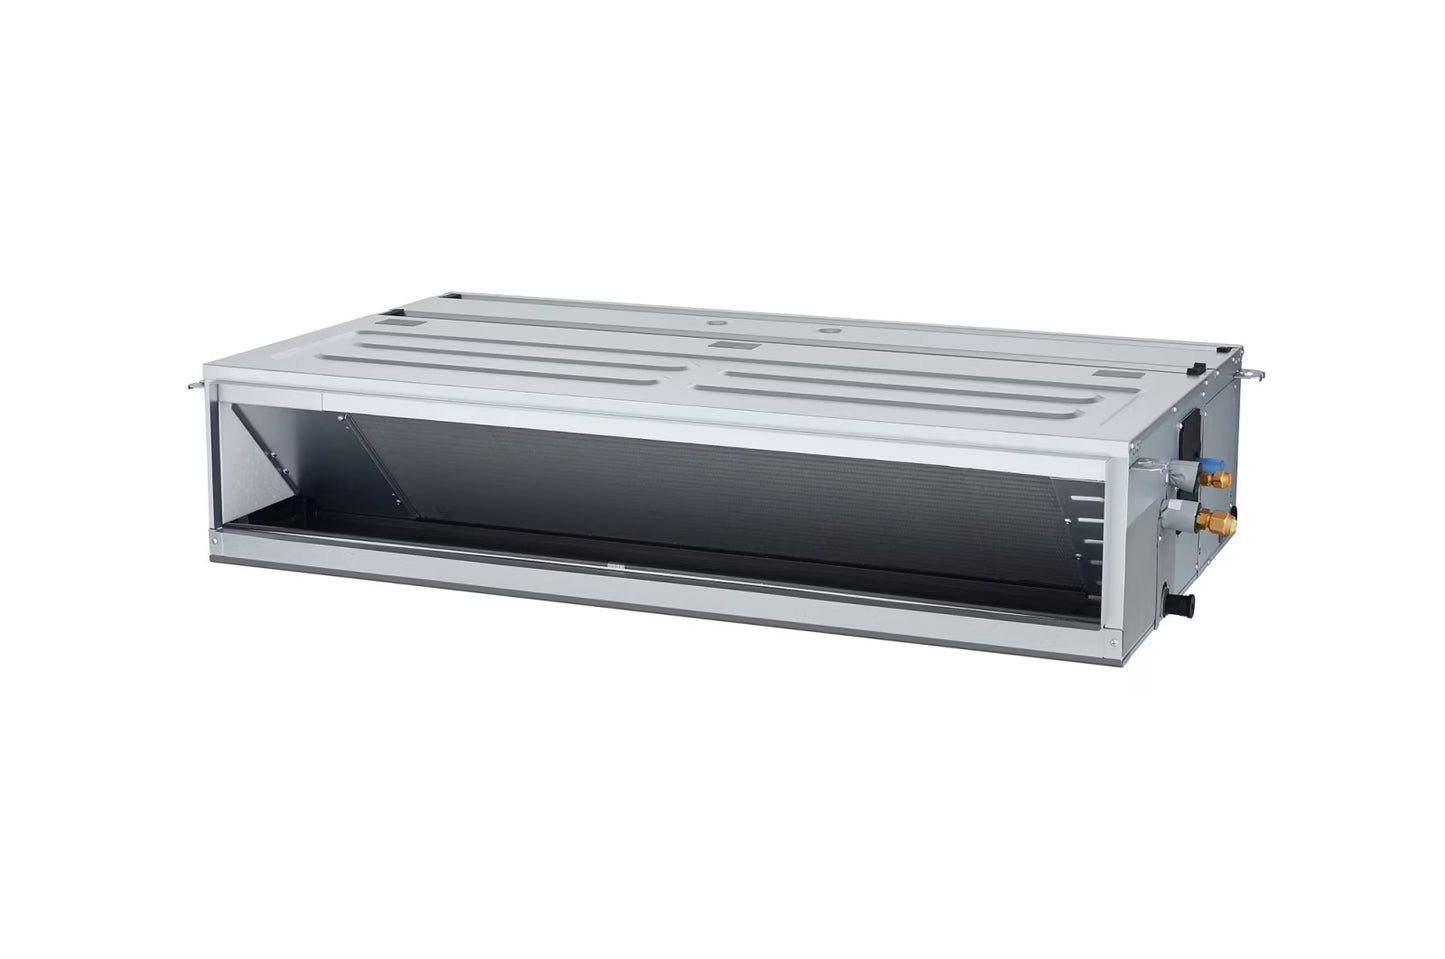 LG Ceiling Concealed Duct INV Unit 4.5KW with Mid Static and E.S.P. Control for Multiple Rooms - ARNU15GM1A4